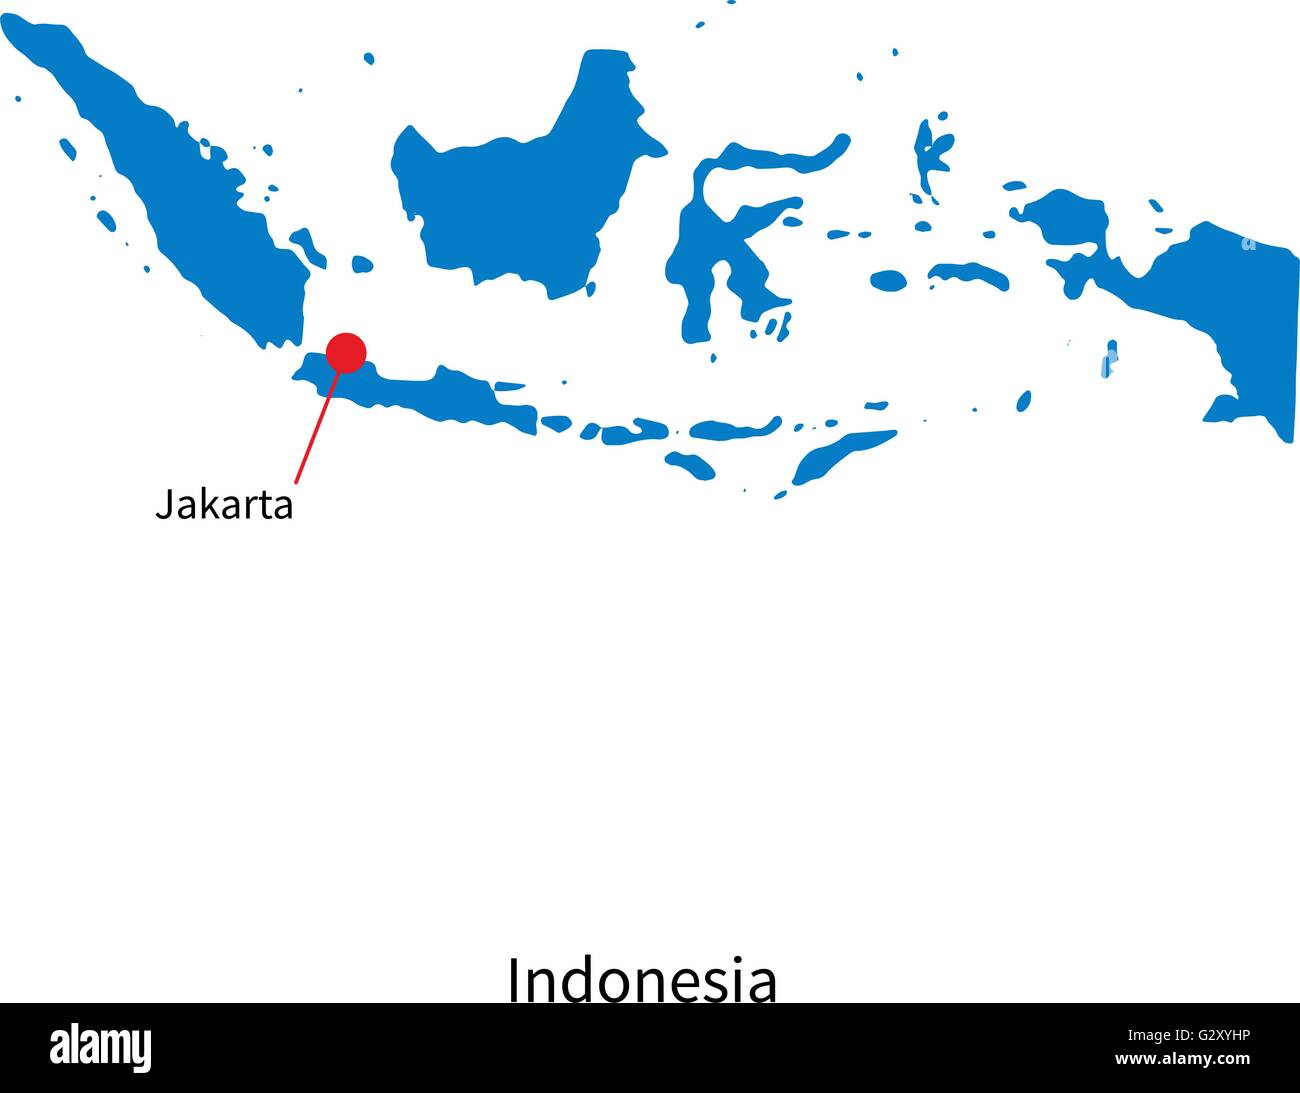 Detailed Vector Map Of Indonesia And Capital City Jakarta G2XYHP 